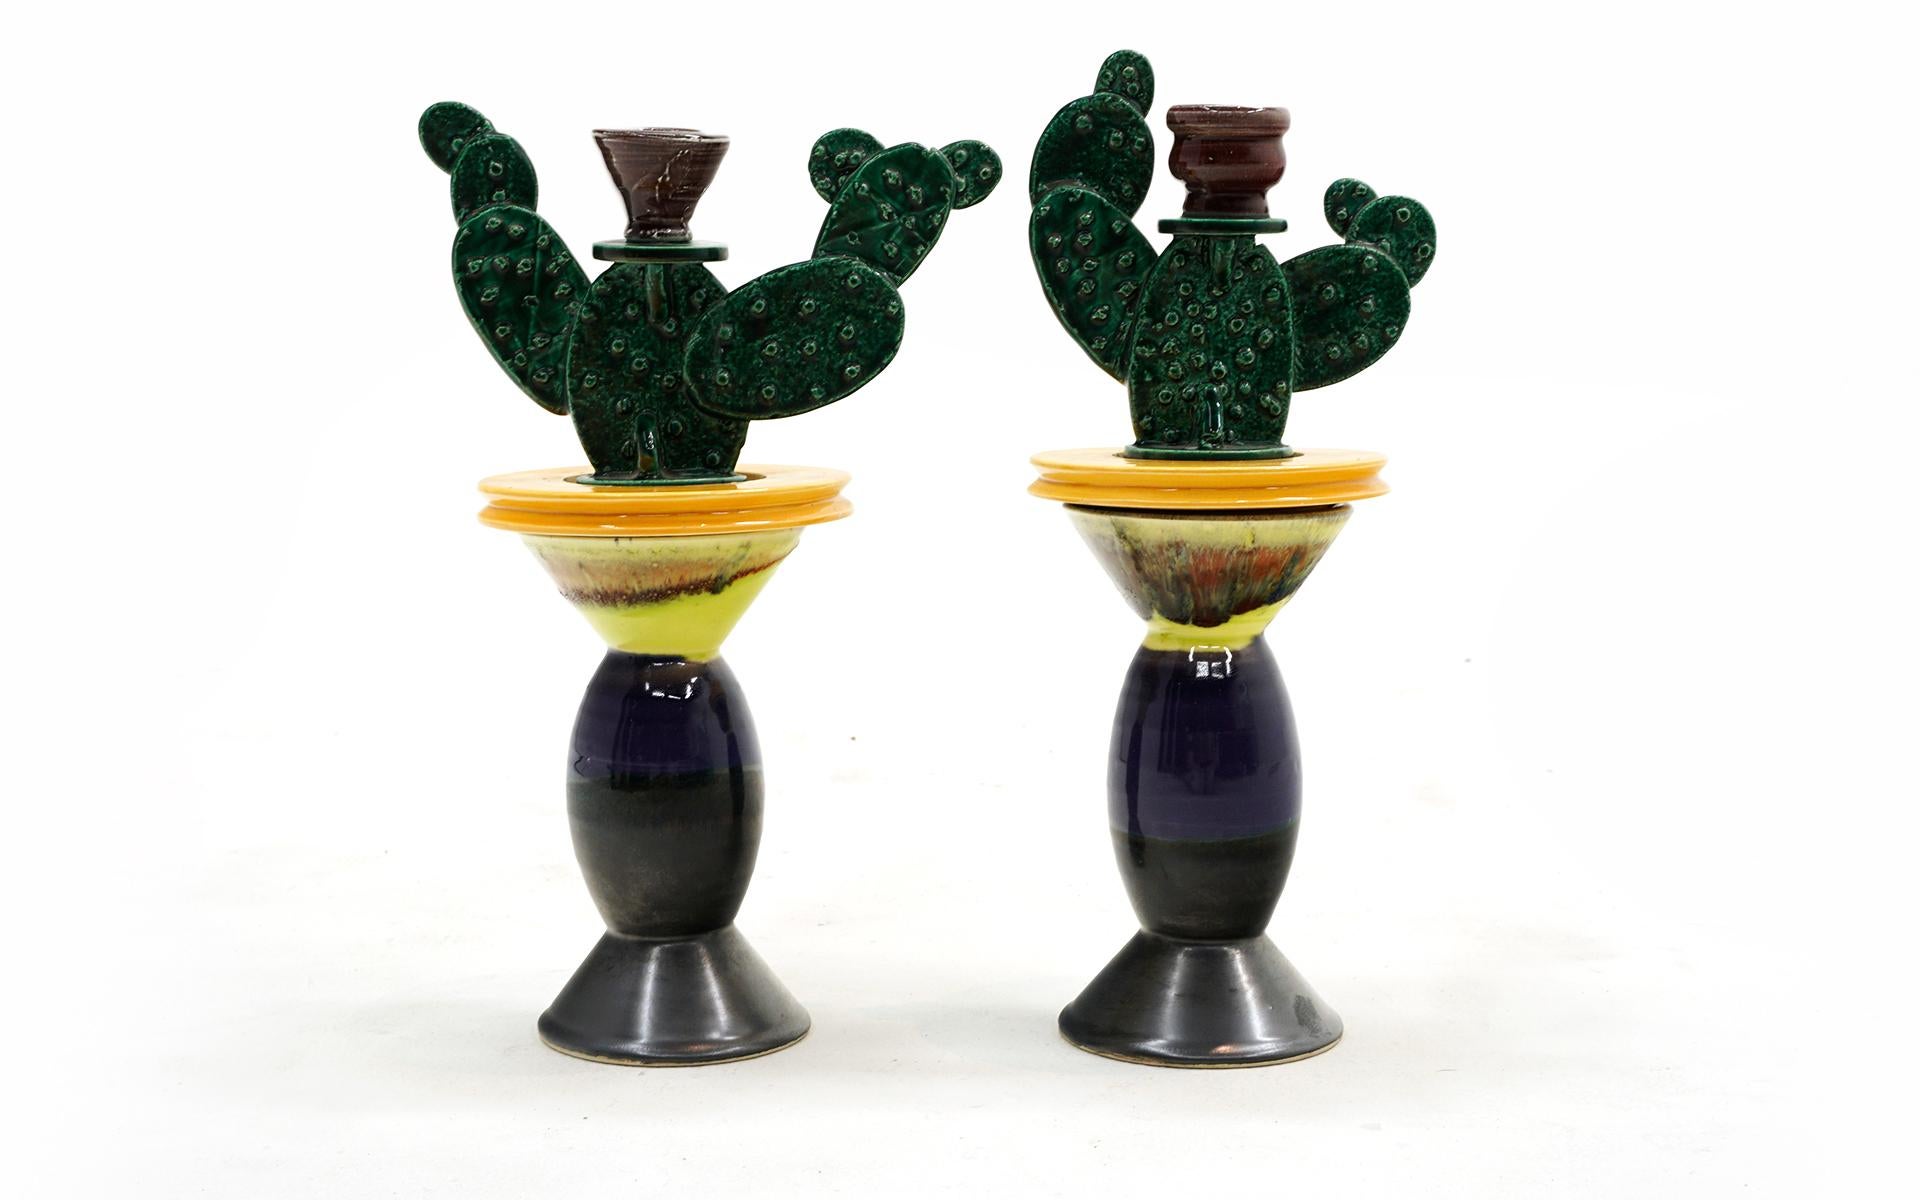 Whimsical cactus candle holders by the iconic post modern artist and designer, Peter Shire, Echo Park, CA.  Each consists of two pieces that can be used together or separately.  Mostly green, blue and yellow coloring.  Excellent condition and ready